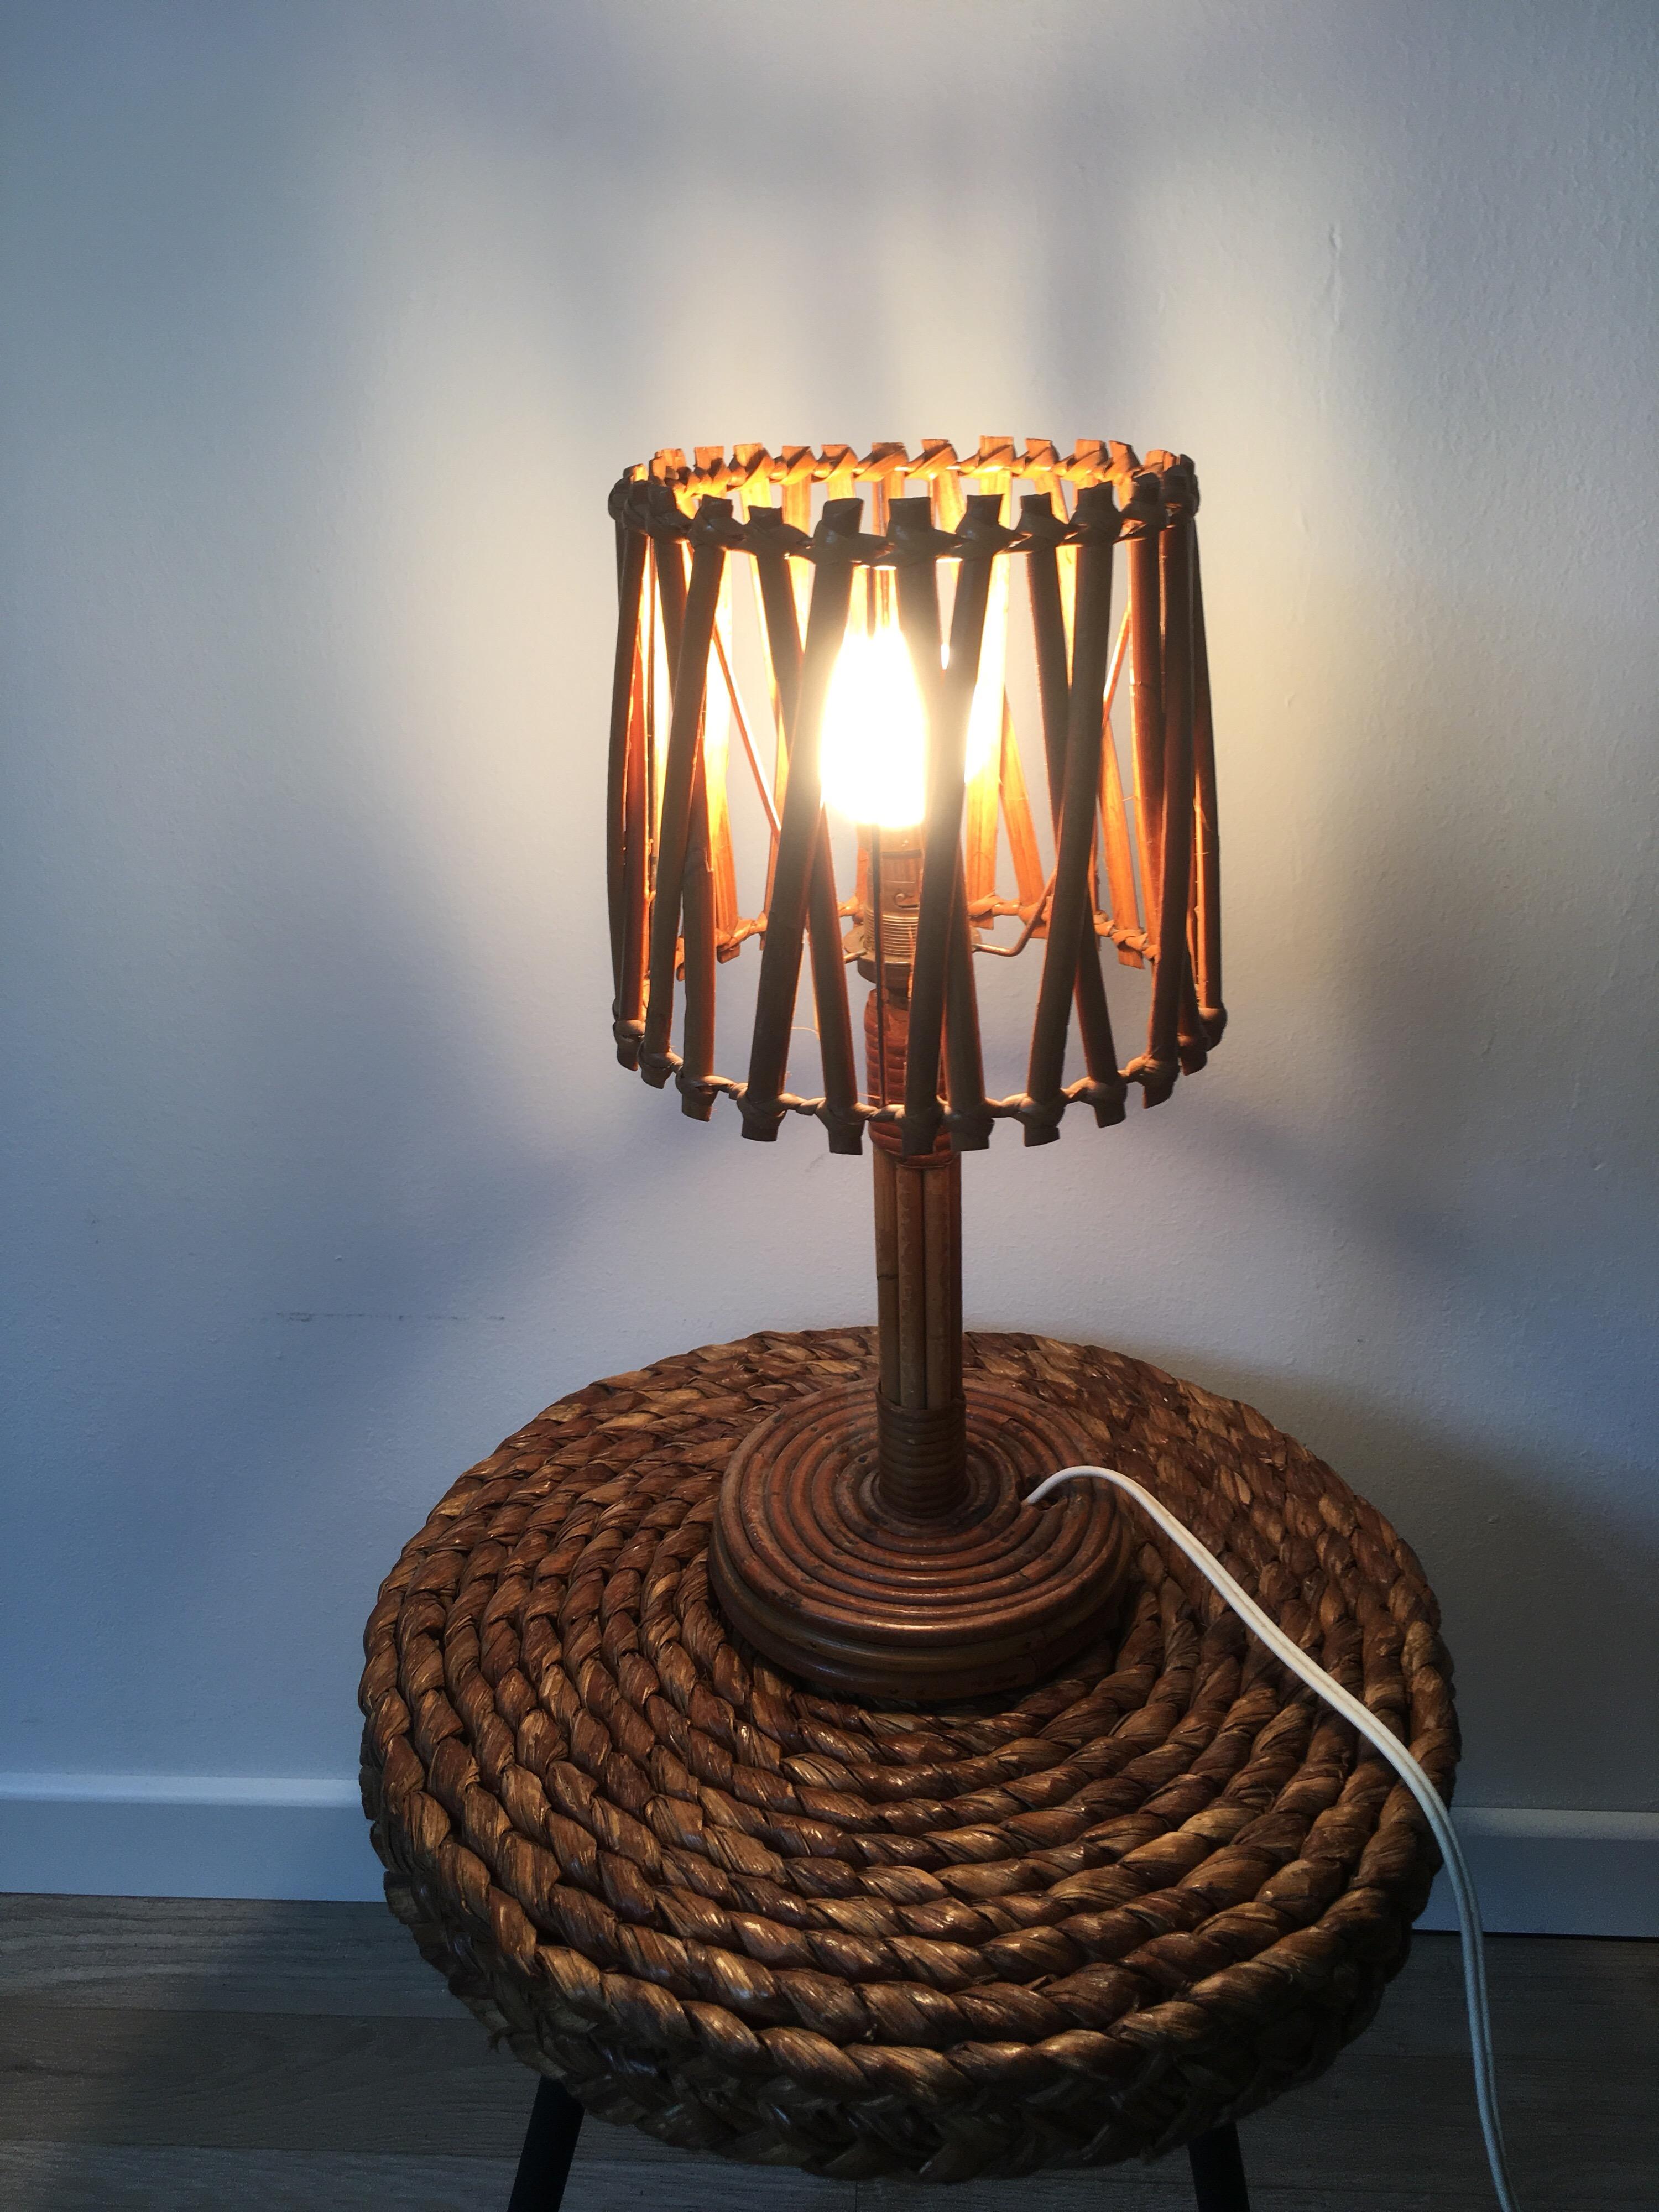 Louis Sognot Rattan Table Lamp, Original Rattan Lampshade, French, 1950s For Sale 9